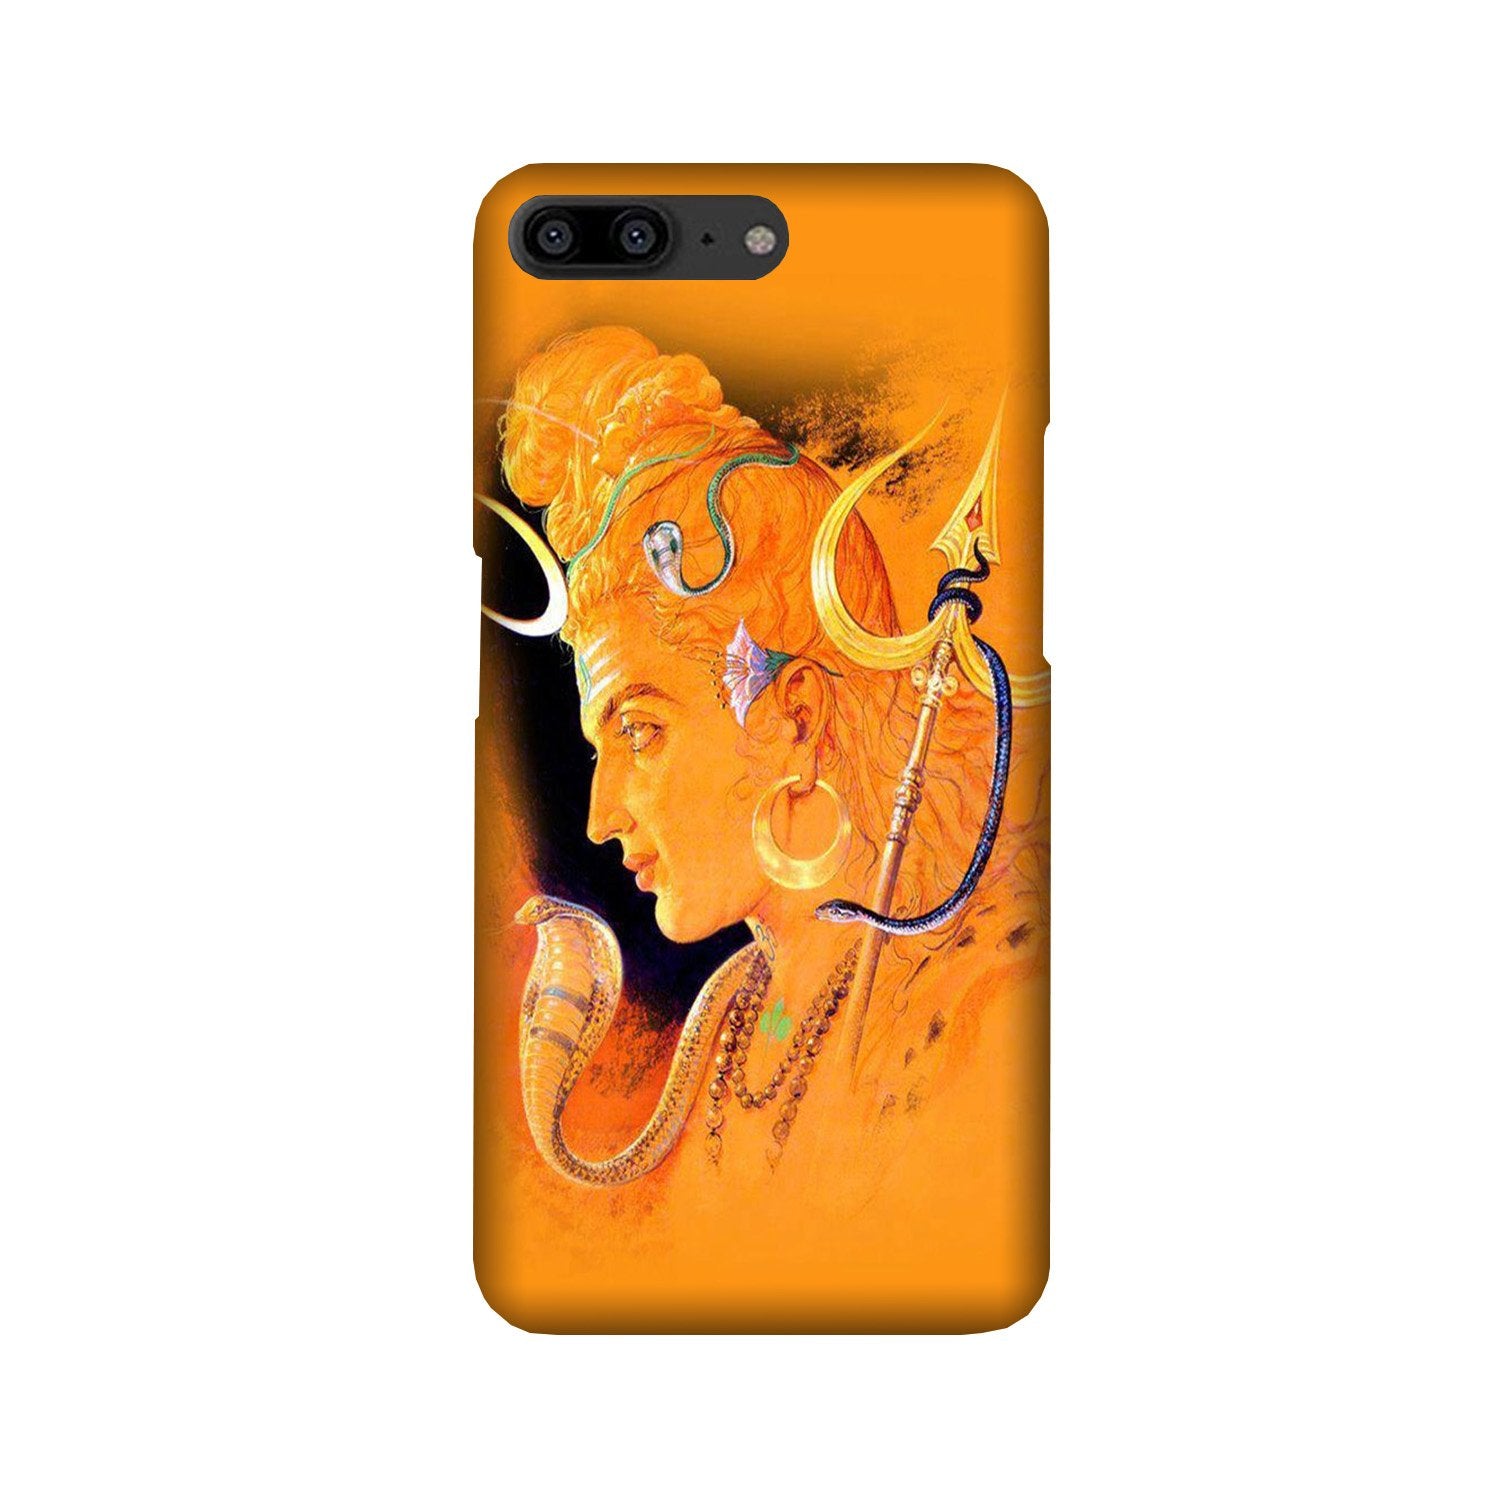 Lord Shiva Case for OnePlus 5 (Design No. 293)